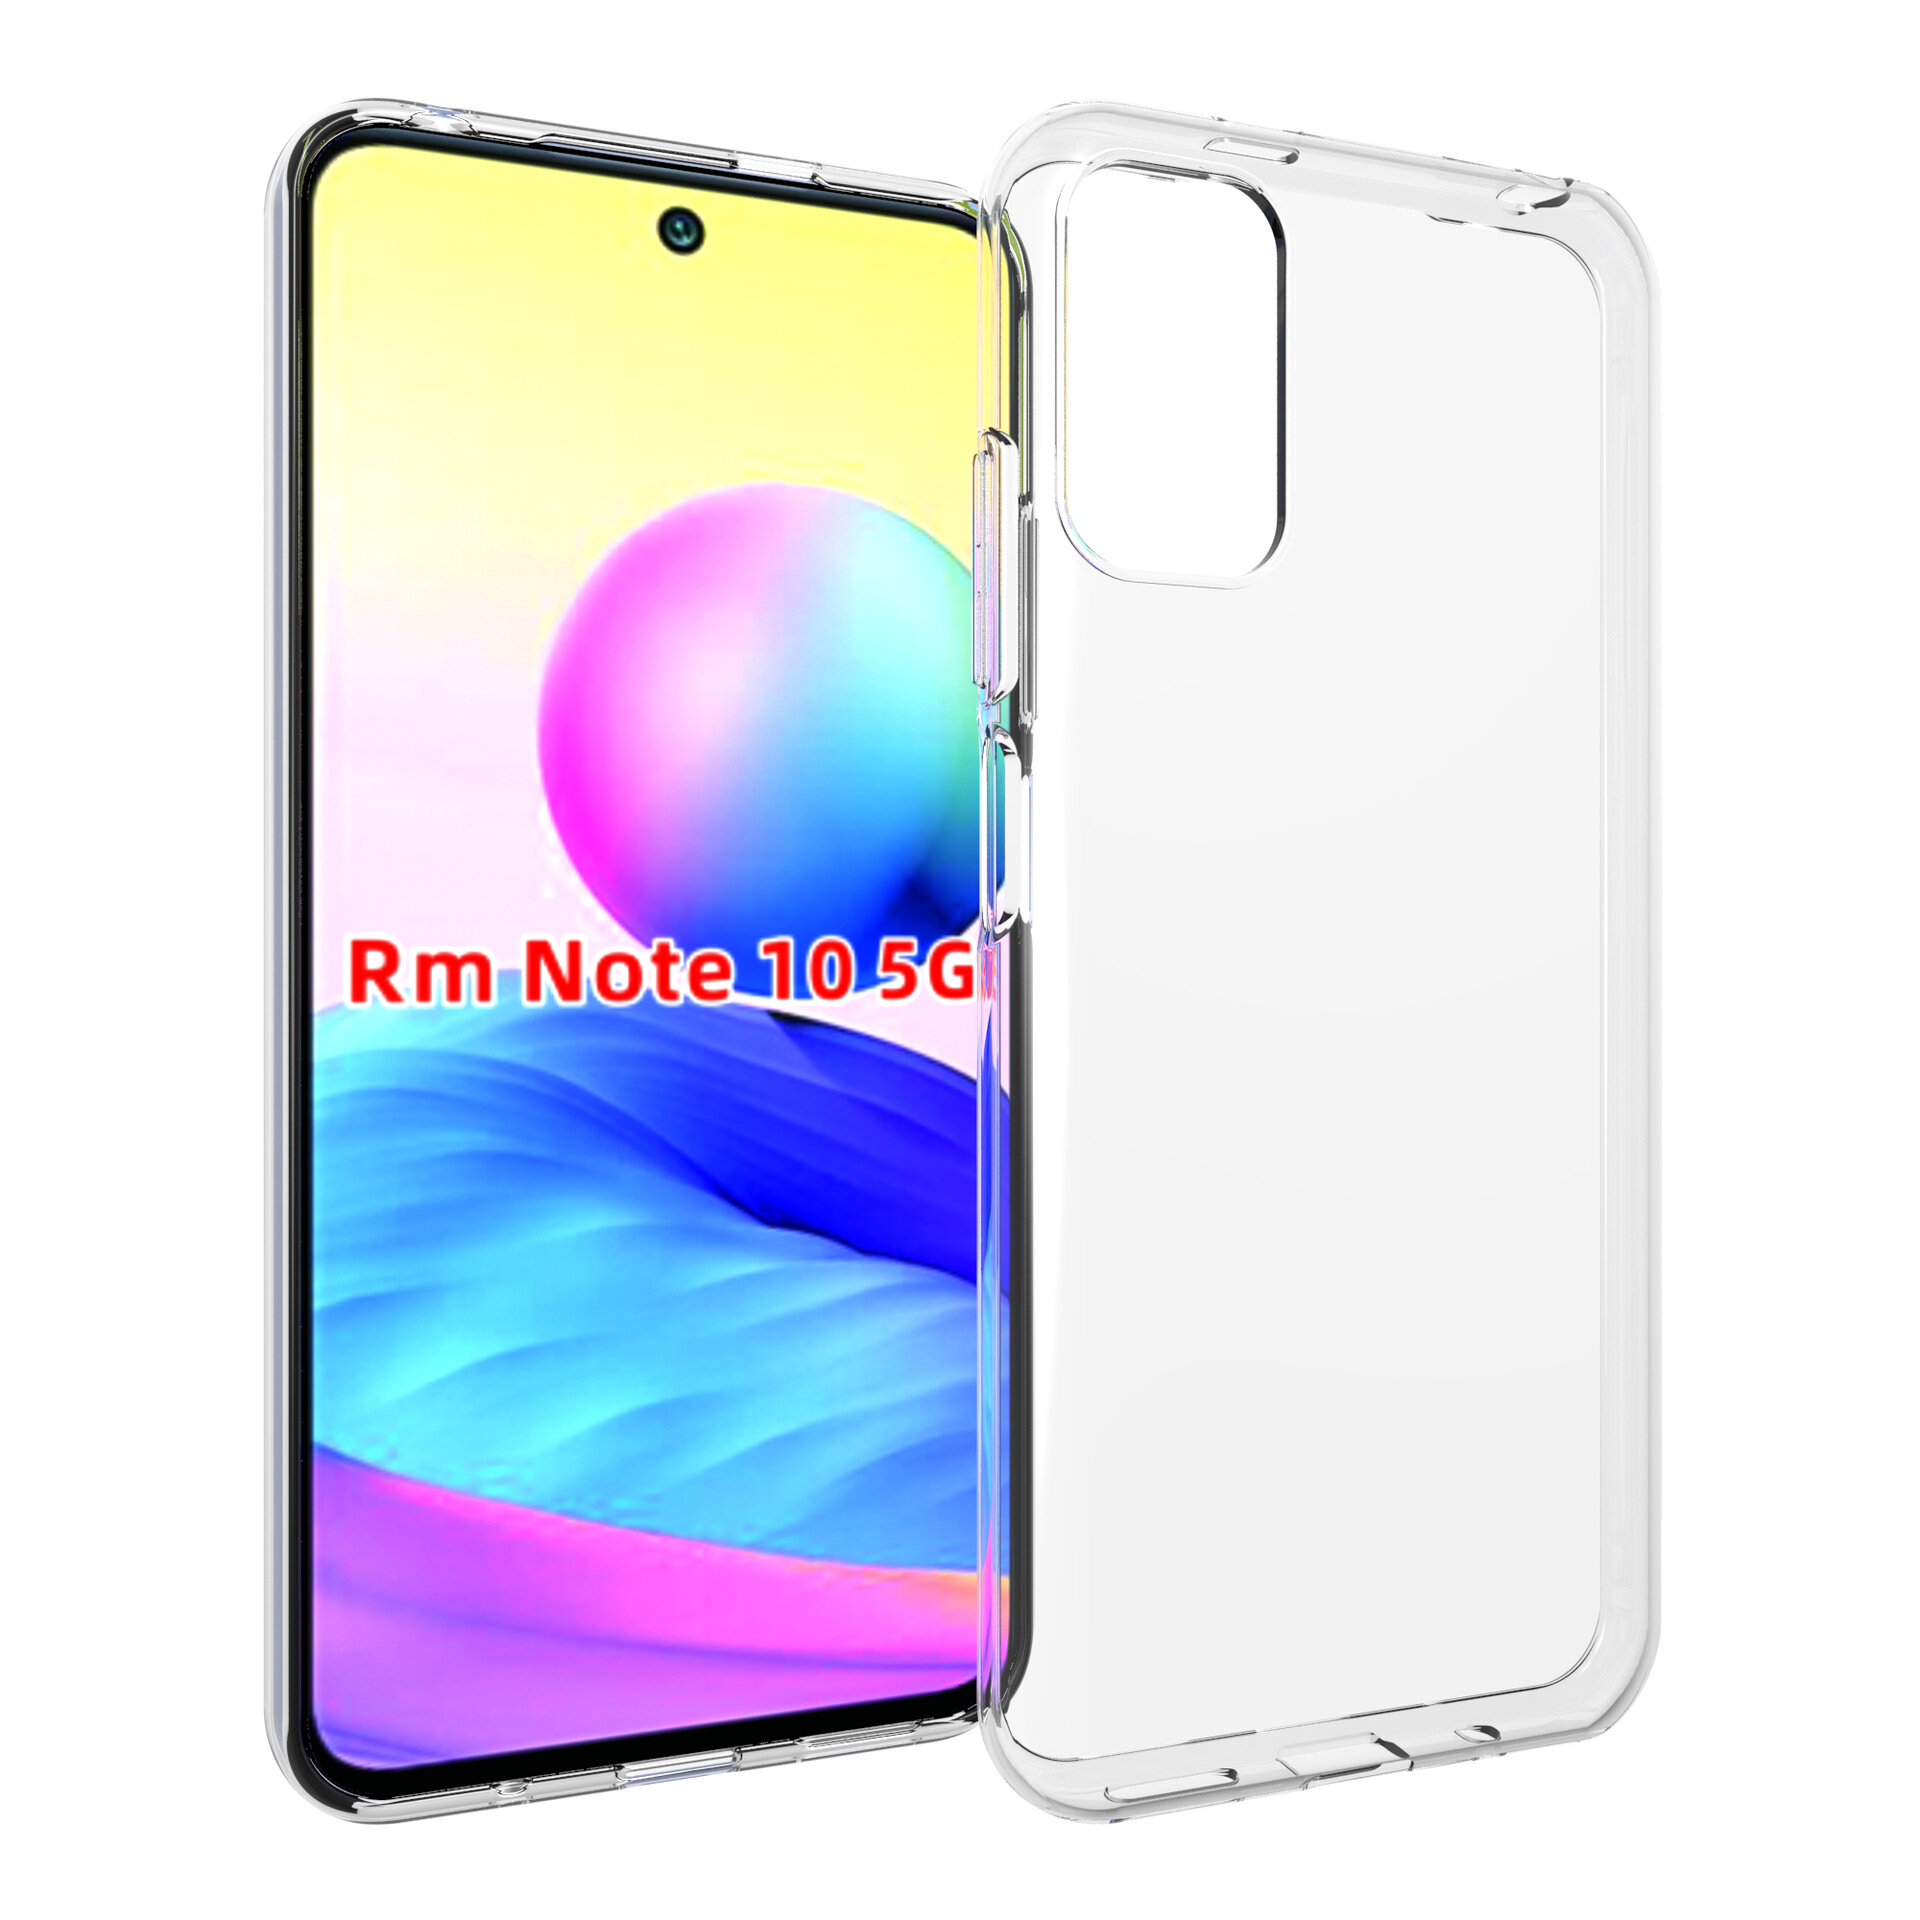 

Bakeey for POCO M3 Pro 5G NFC Global Version/ Xiaomi Redmi Note 10 5G Case Crystal Clear Transparent Ultra-Thin Non-Yell